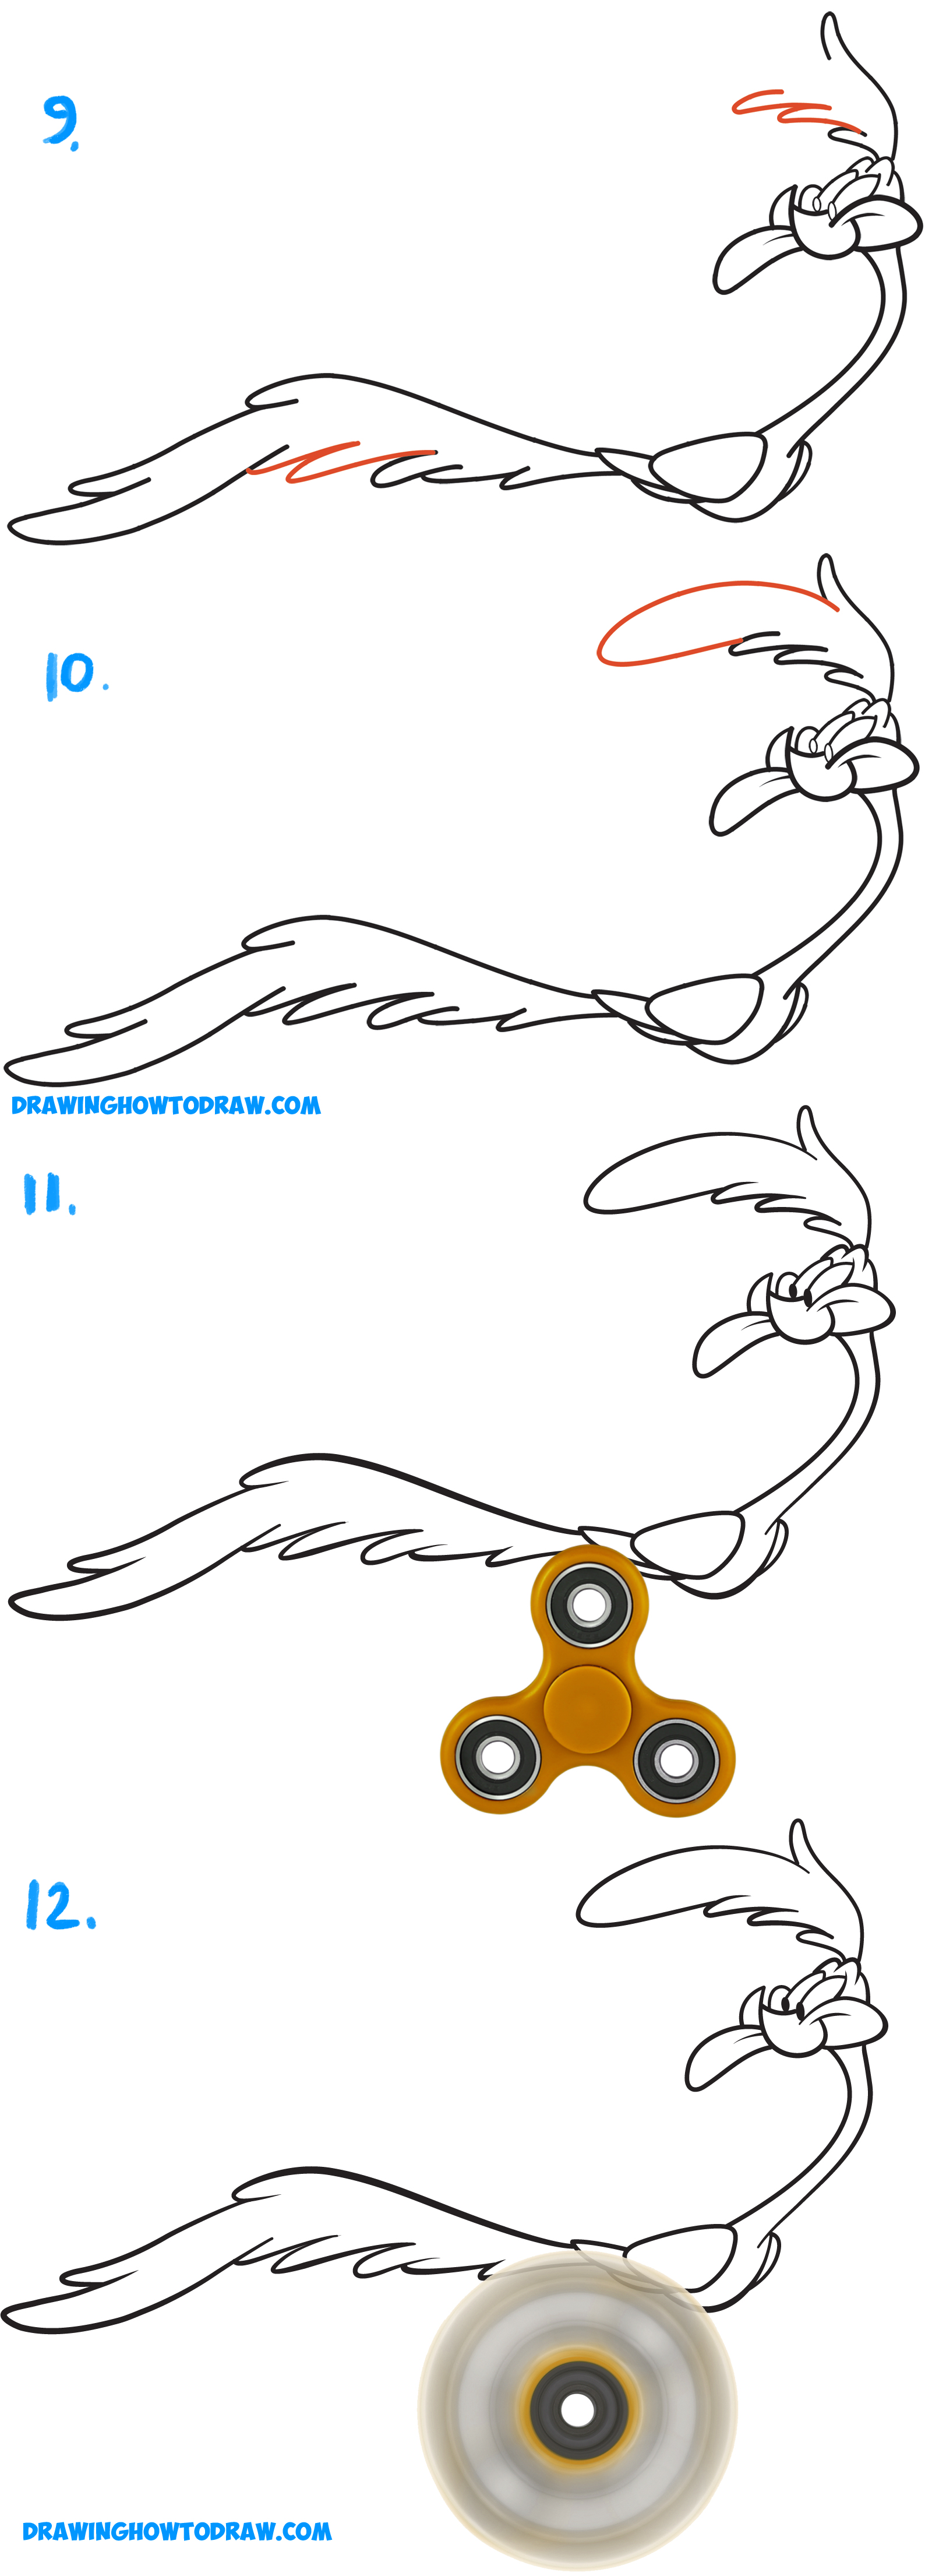 How to Draw Road Runner from Looney Tunes Using Spinning Fidget Spinner as Running Legs with Easy Step by Step Drawing Tutorial